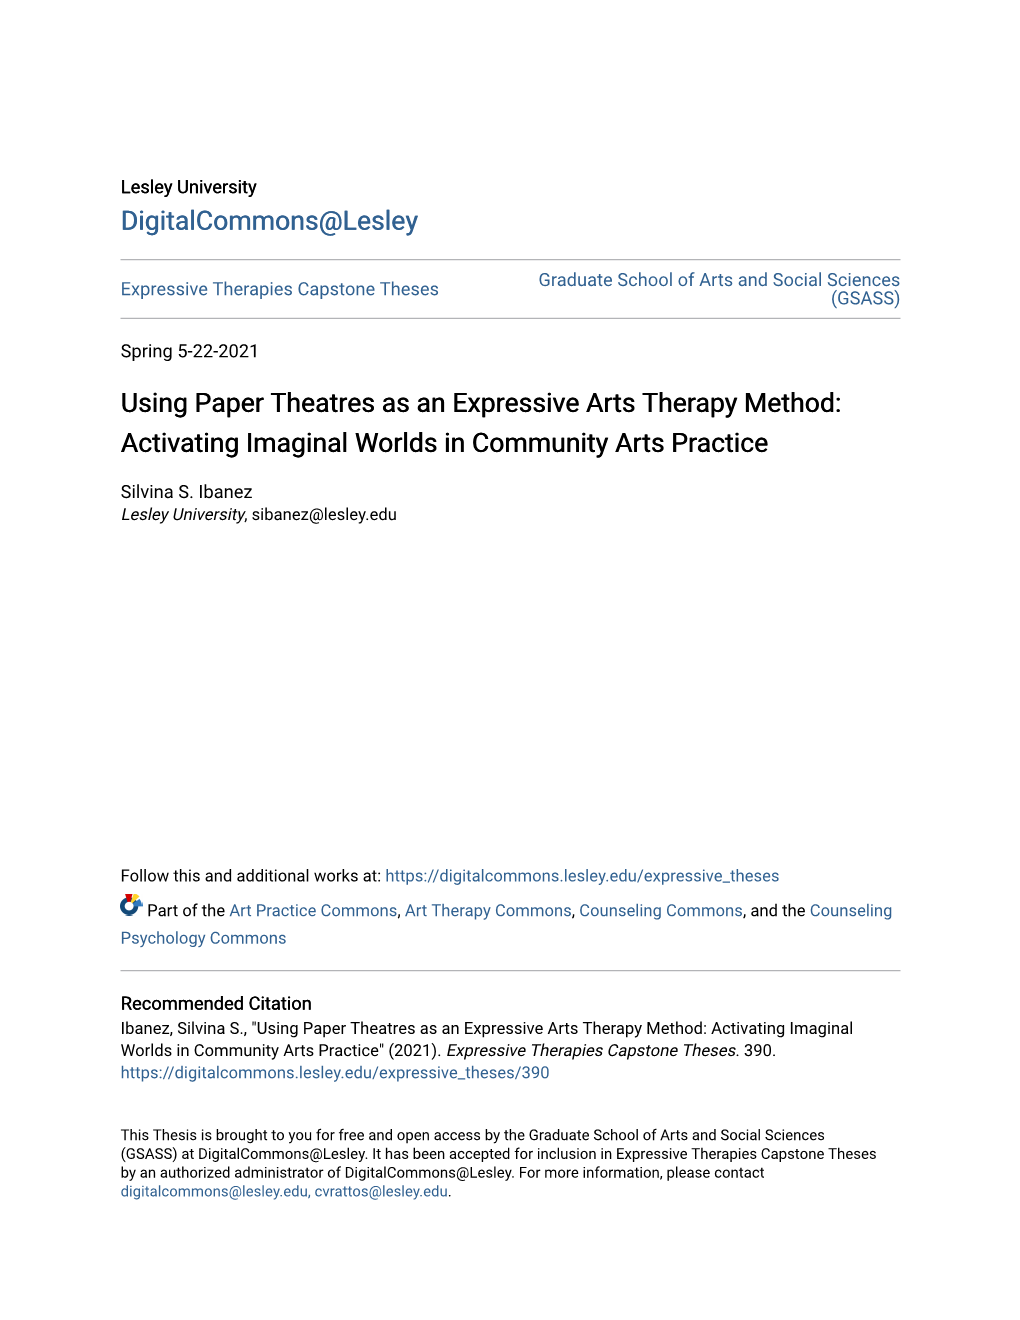 Using Paper Theatres As an Expressive Arts Therapy Method: Activating Imaginal Worlds in Community Arts Practice